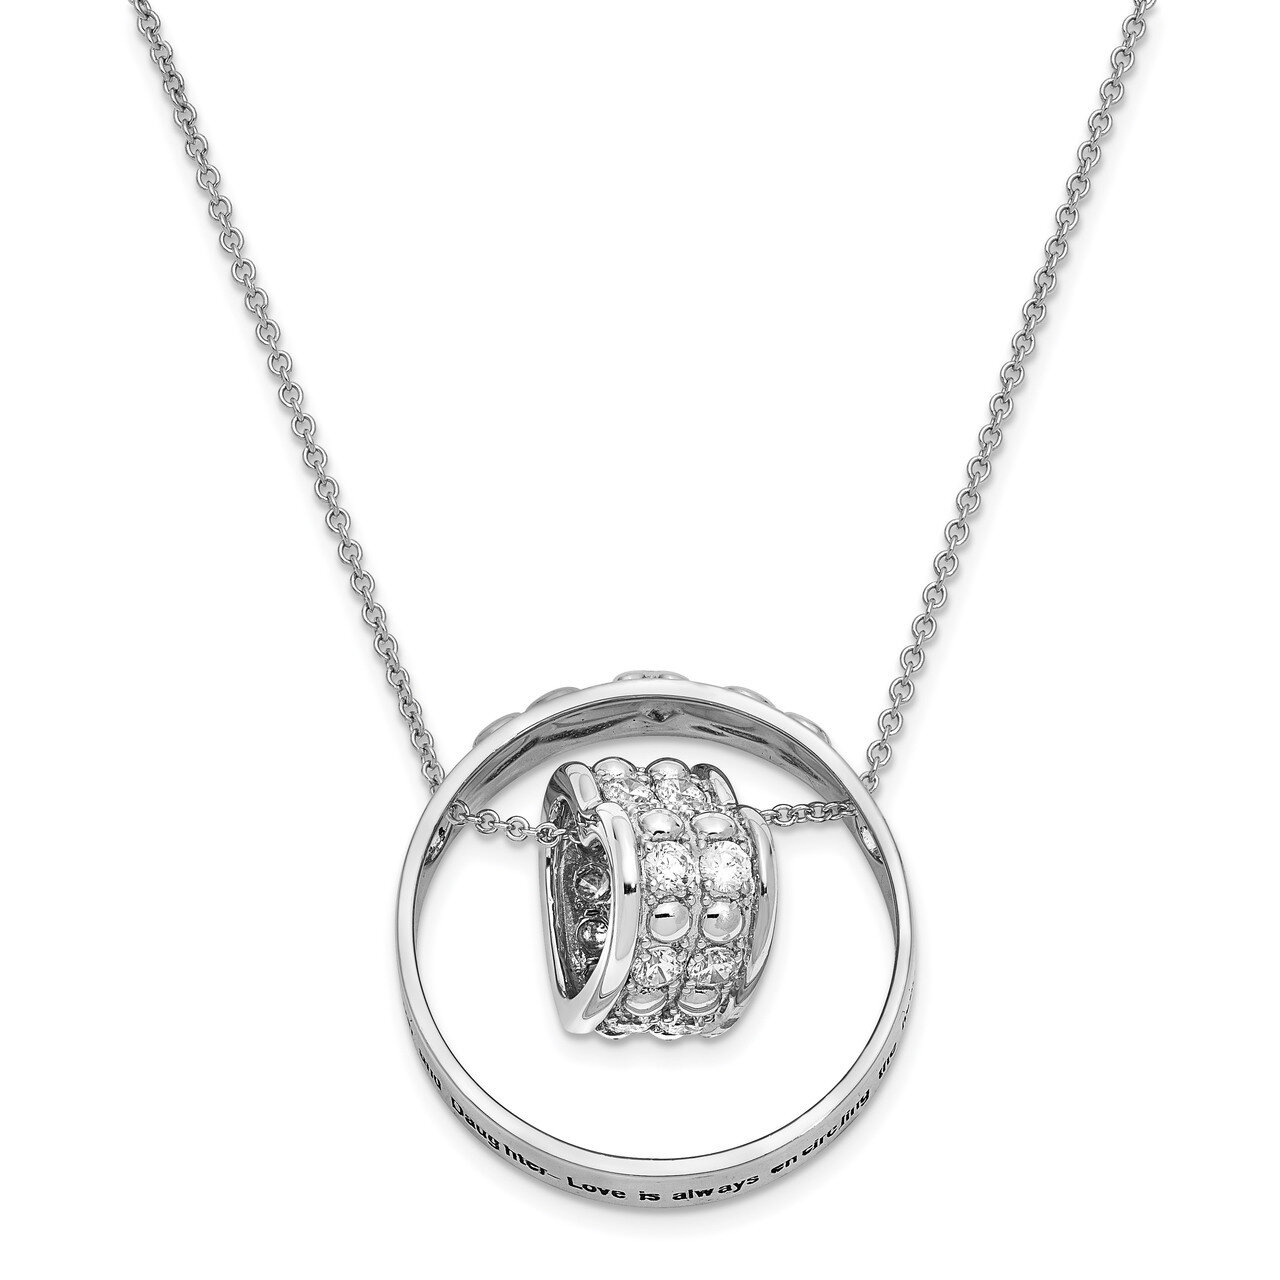 Antiqued Mother Daughter 18 Inch Necklace Sterling Silver CZ Diamond QSX622